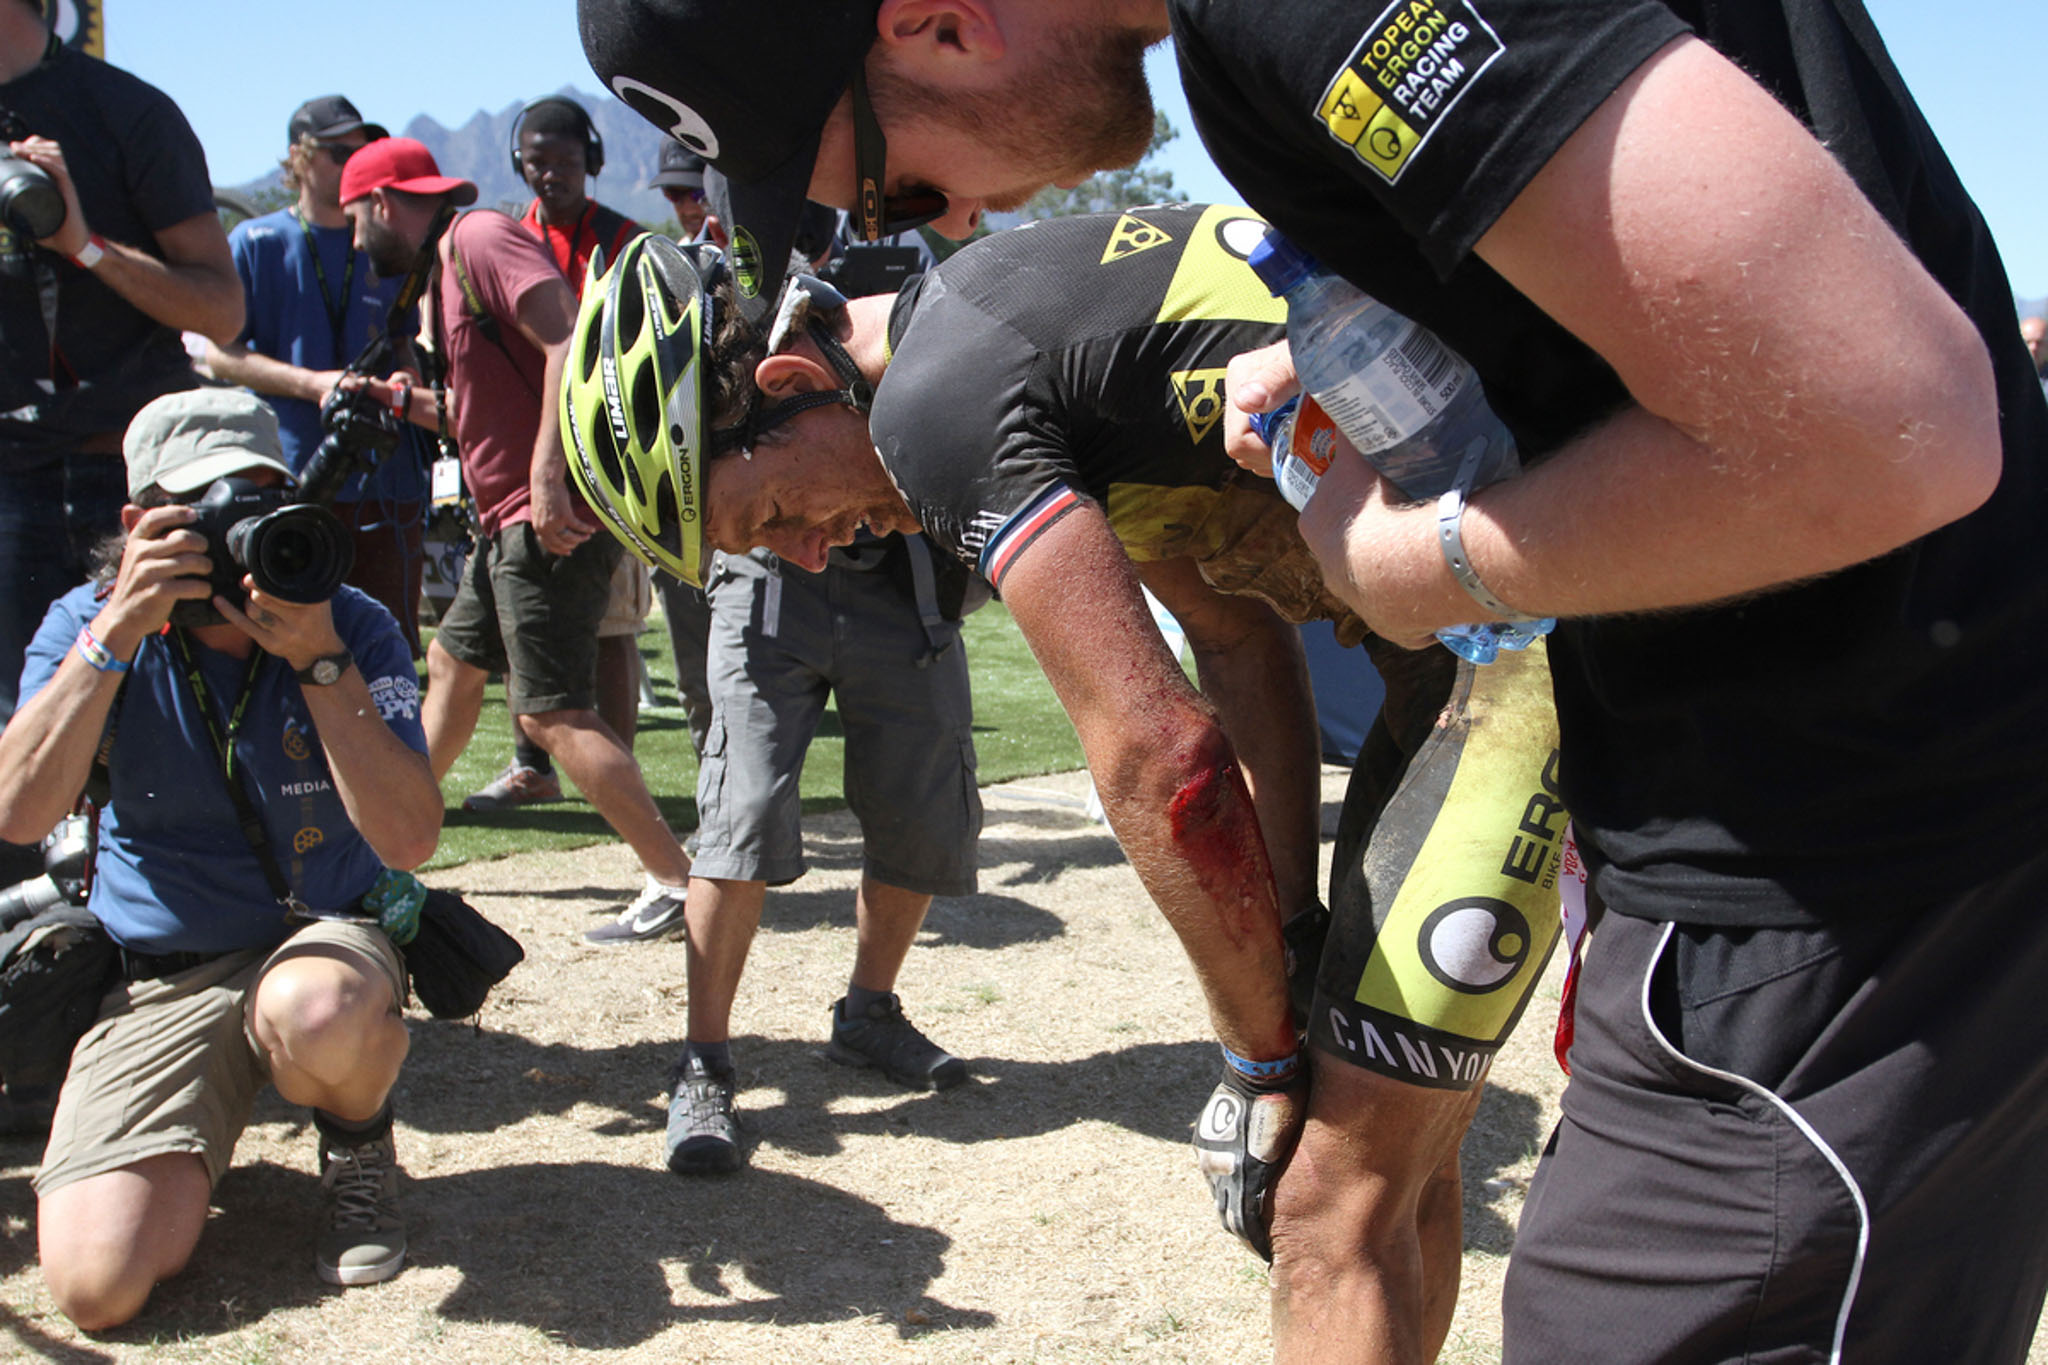 Kristian Hynek of Topeak Ergon Racing after finishing stage 3 with an injured arm after a crash during stage 3 of the 2016 Absa Cape Epic Mountain Bike stage race held from Saronsberg Wine Estate in Tulbagh to the Cape Peninsula University of Technology in Wellington, South Africa on the 16th March 2016 Photo by Shaun Roy/Cape Epic/SPORTZPICS PLEASE ENSURE THE APPROPRIATE CREDIT IS GIVEN TO THE PHOTOGRAPHER AND SPORTZPICS ALONG WITH THE ABSA CAPE EPIC {ace2016}